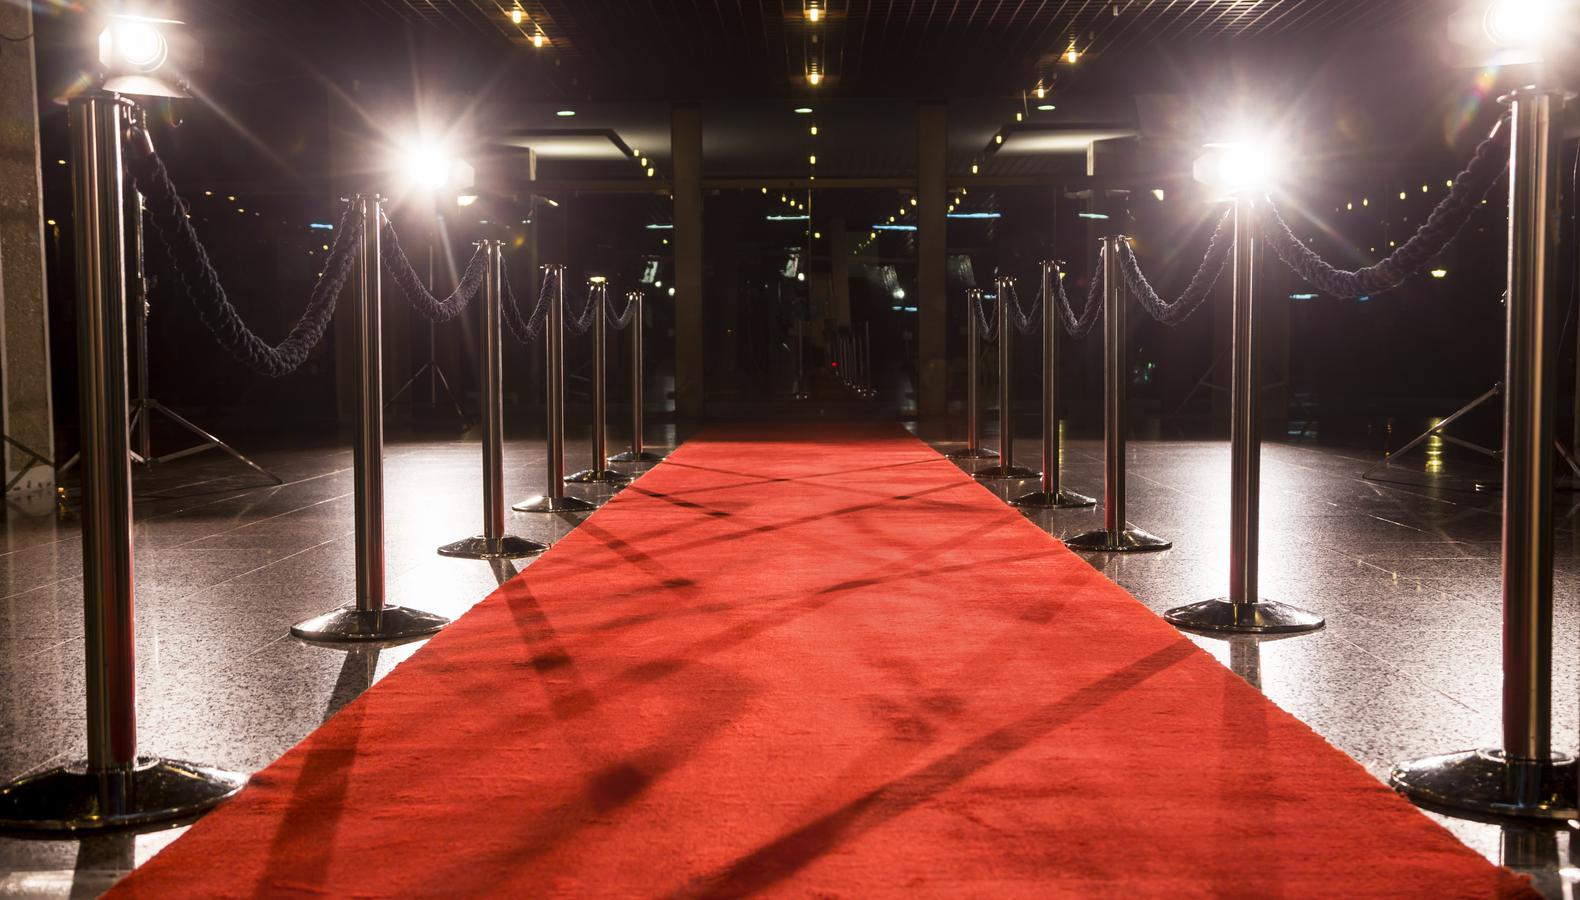 How to Walk the Red Carpet According to a Publicist